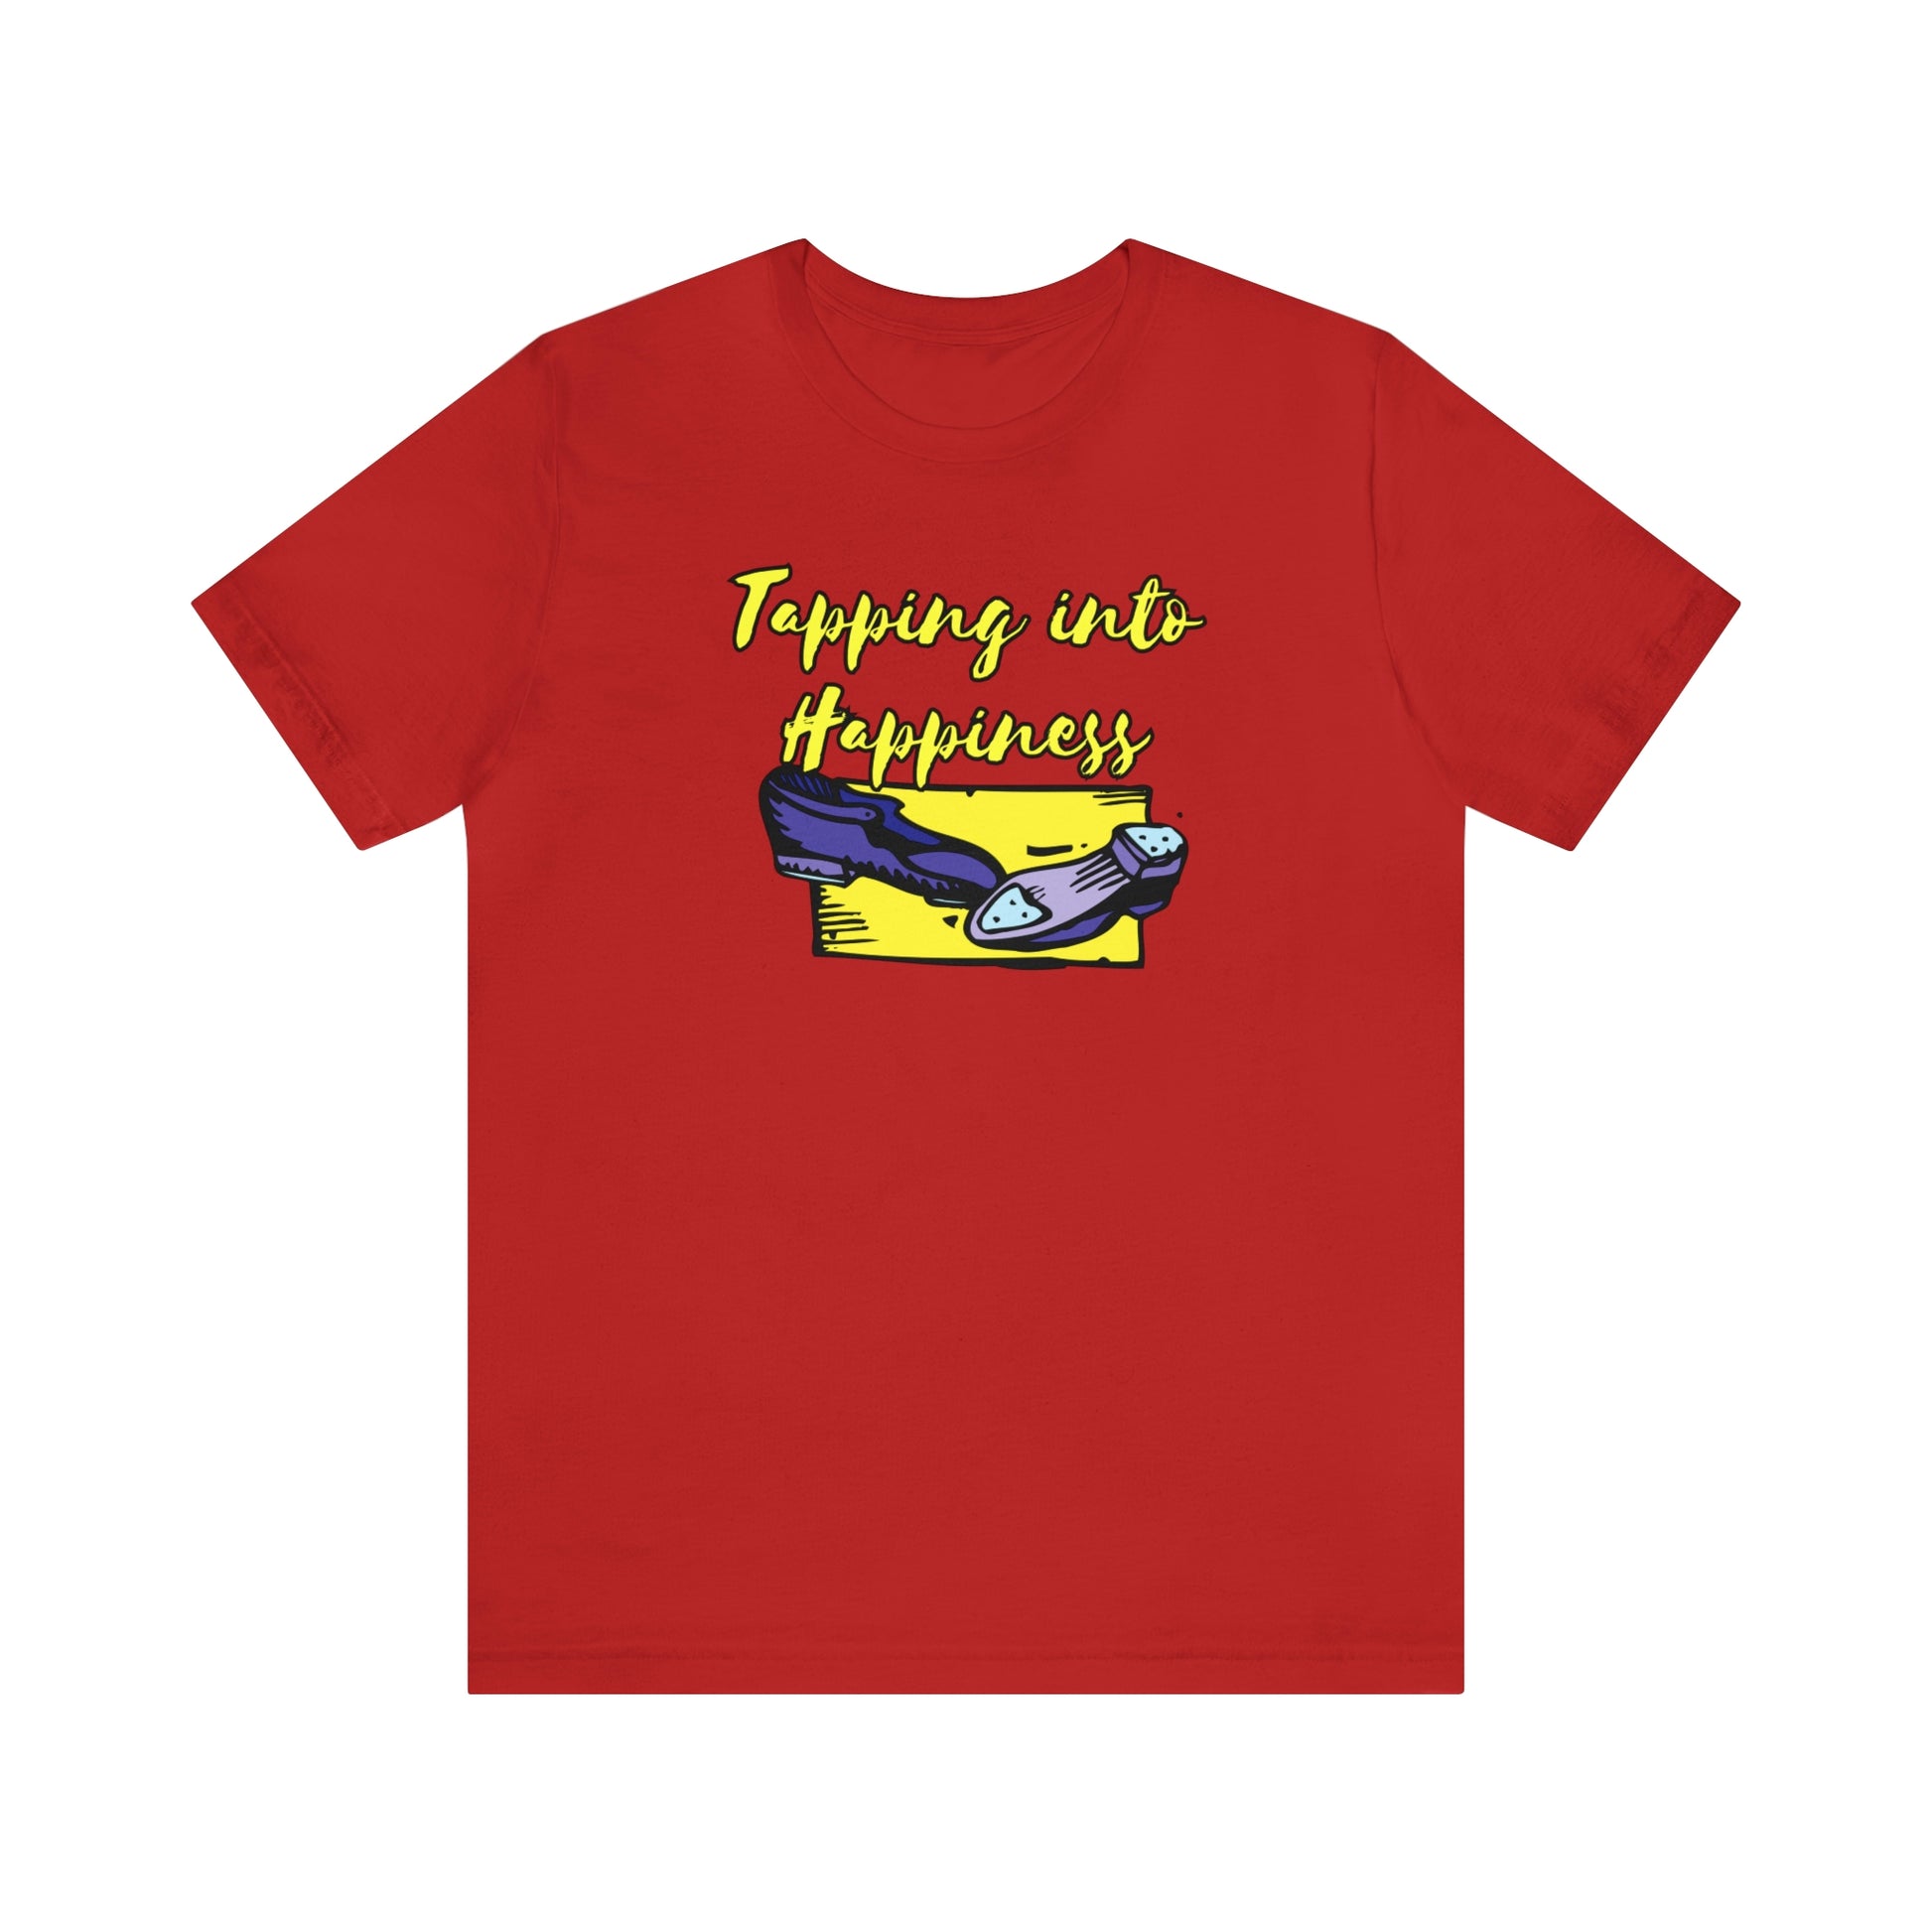 A T-shirt with the text "Tapping into happines" and a picture of tap dance shoes